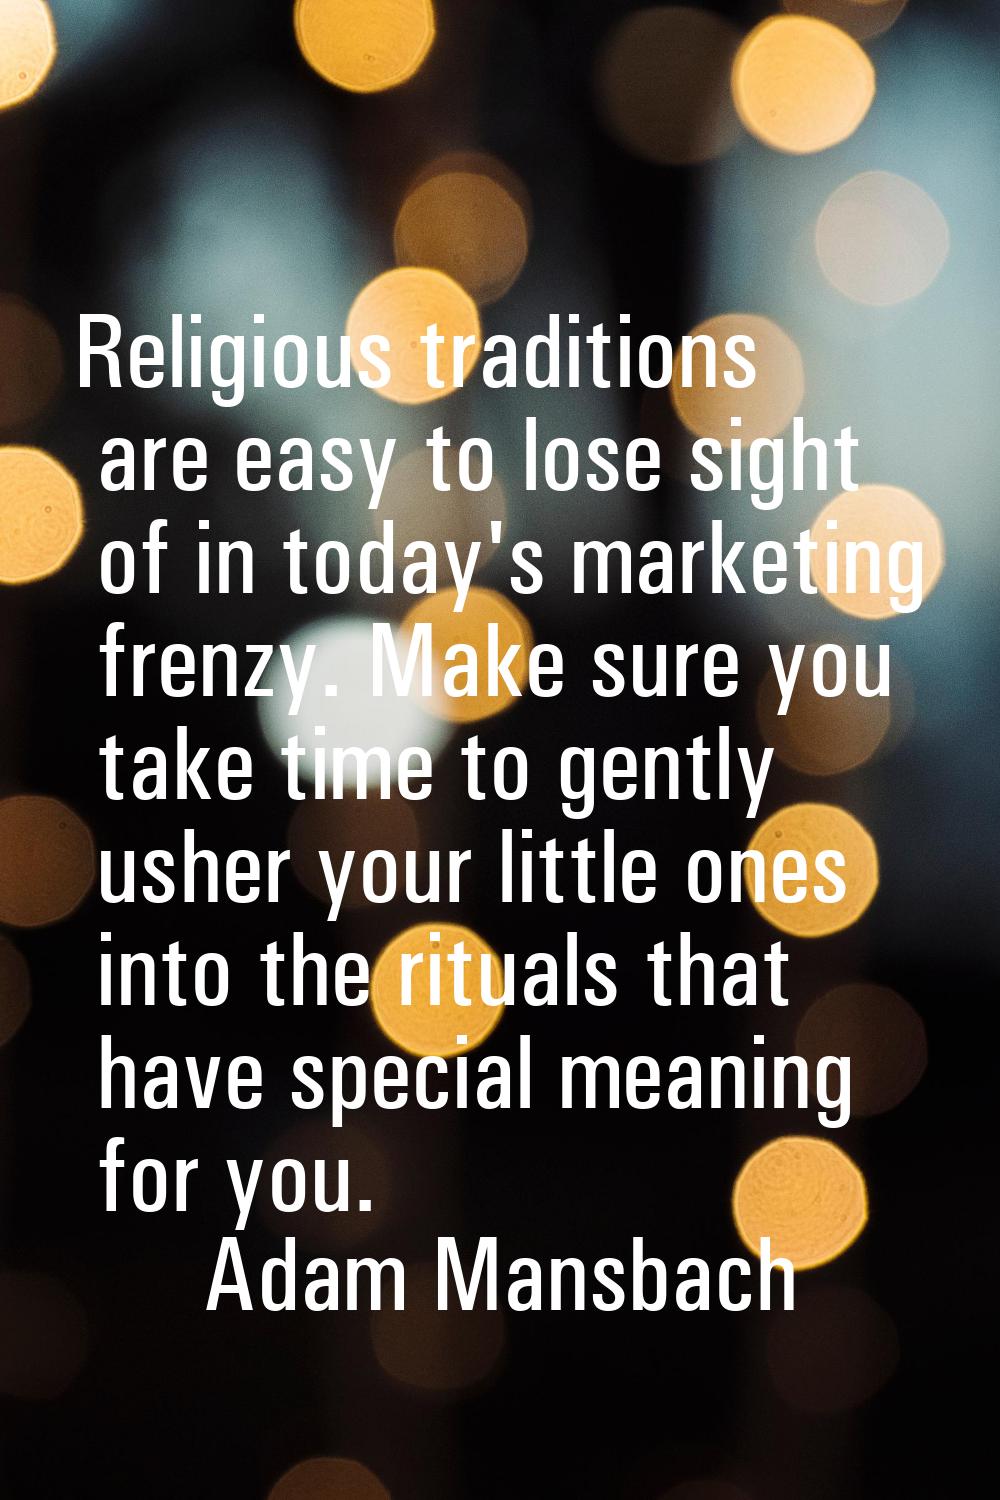 Religious traditions are easy to lose sight of in today's marketing frenzy. Make sure you take time